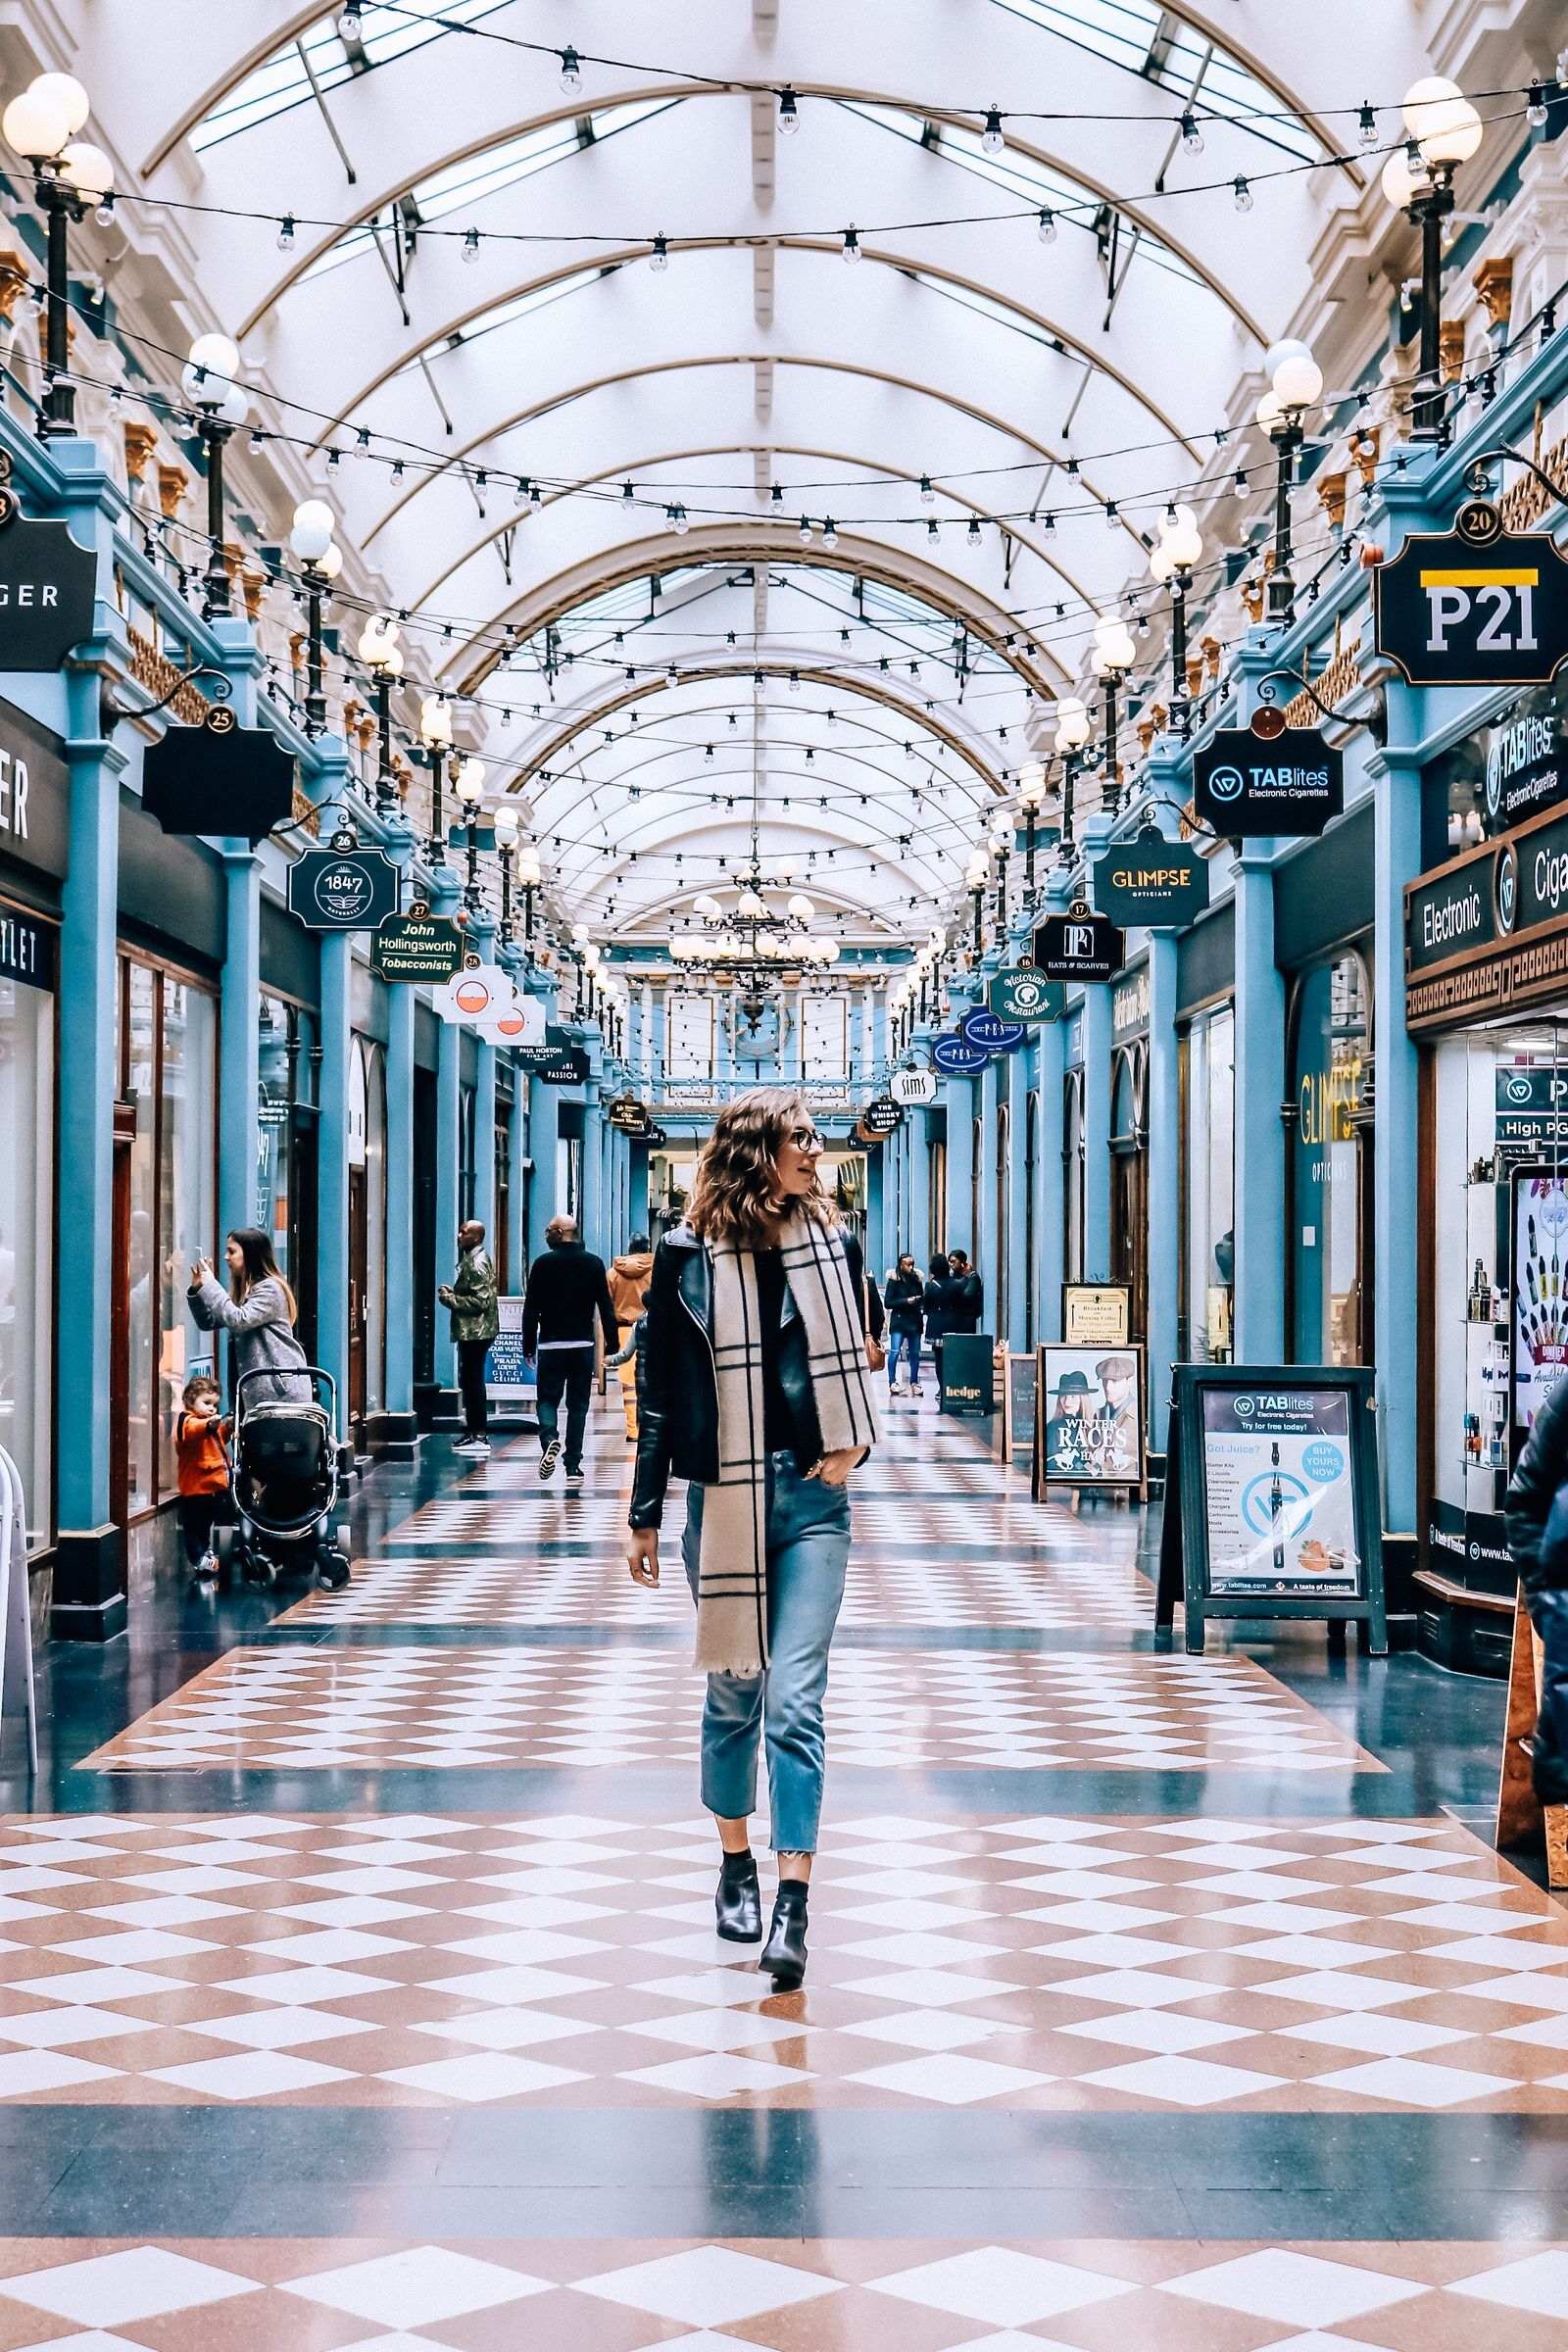 An indoor shopping arcade with blue pillars and diamond patterned floor, woman is walking down the centre of the arcade in jeans, boots and a black jacket